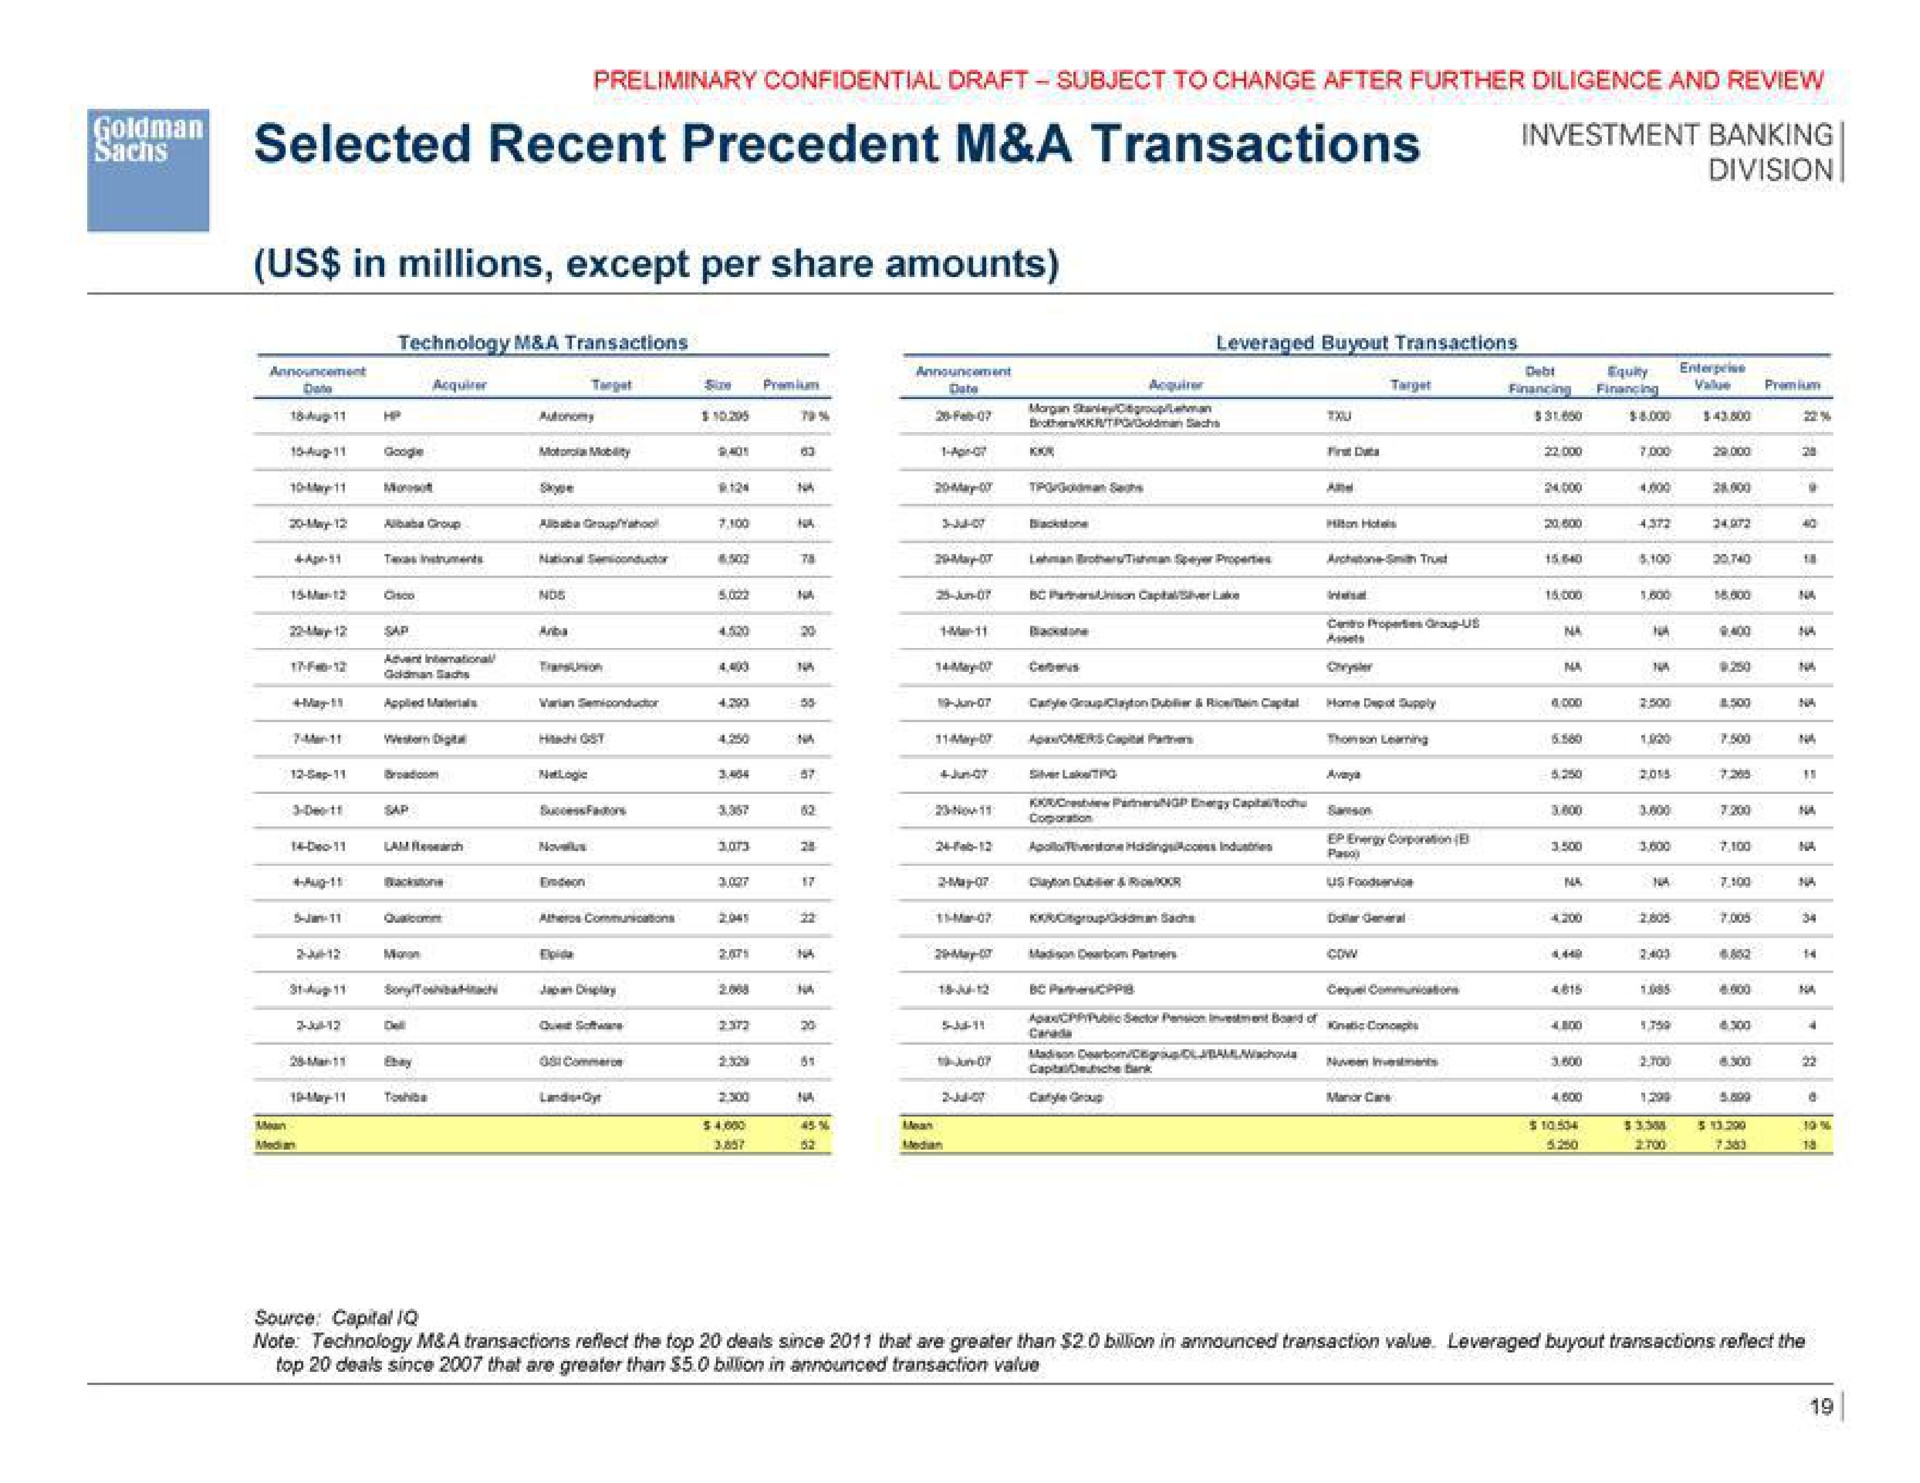 selected recent precedent a transactions cree us in millions except per share amounts | Goldman Sachs